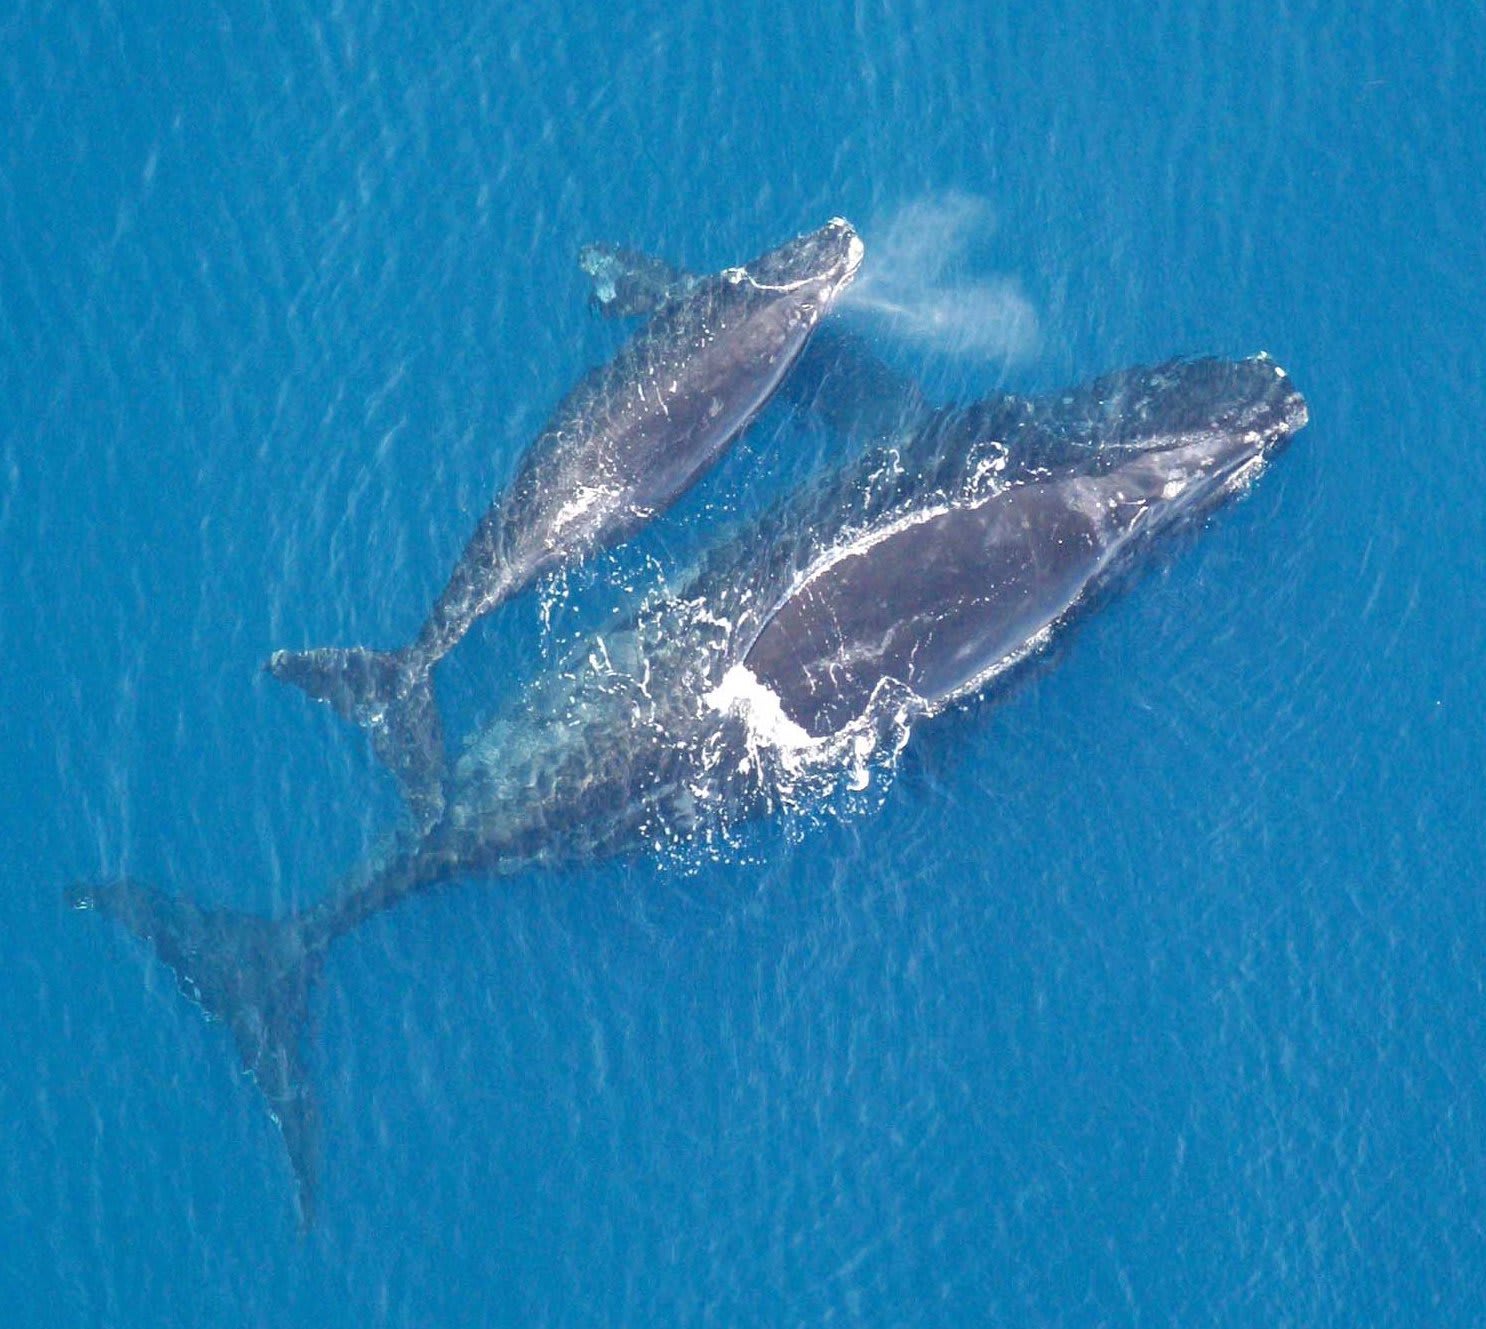 Humans, We've Shrunk the Whales